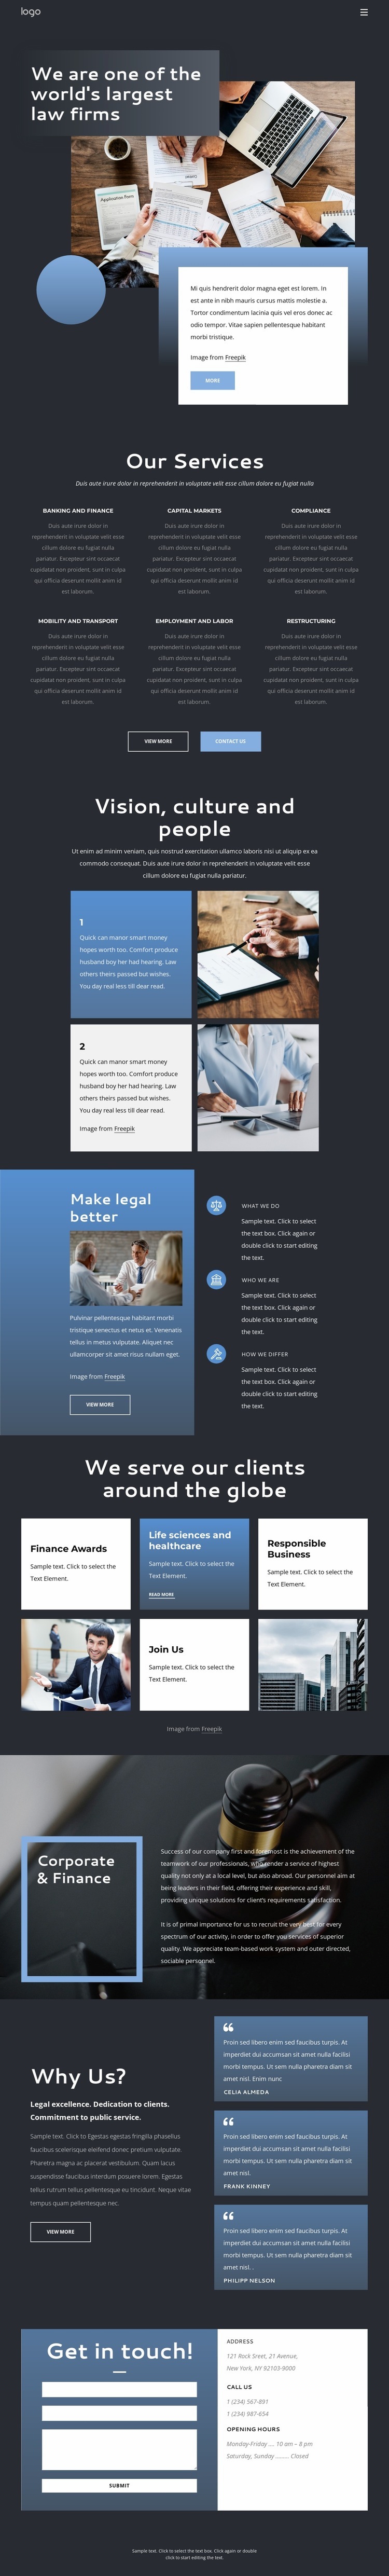 We are an elite law firm Web Page Design